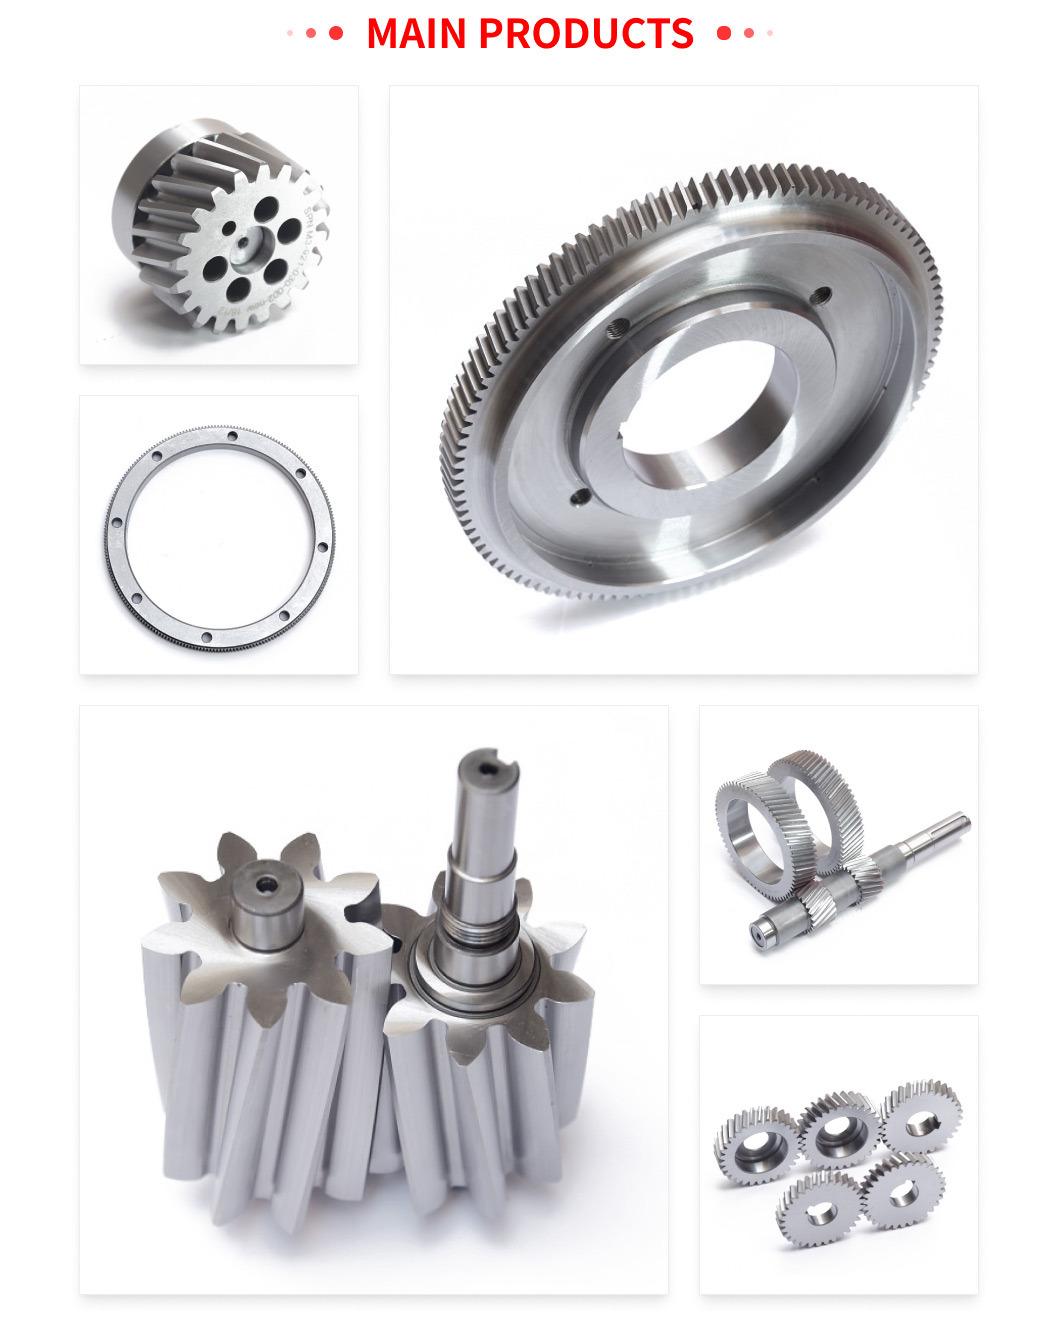 Car Hardened Tooth Surface OEM Helical Rack Transmission Gear with Factory Price